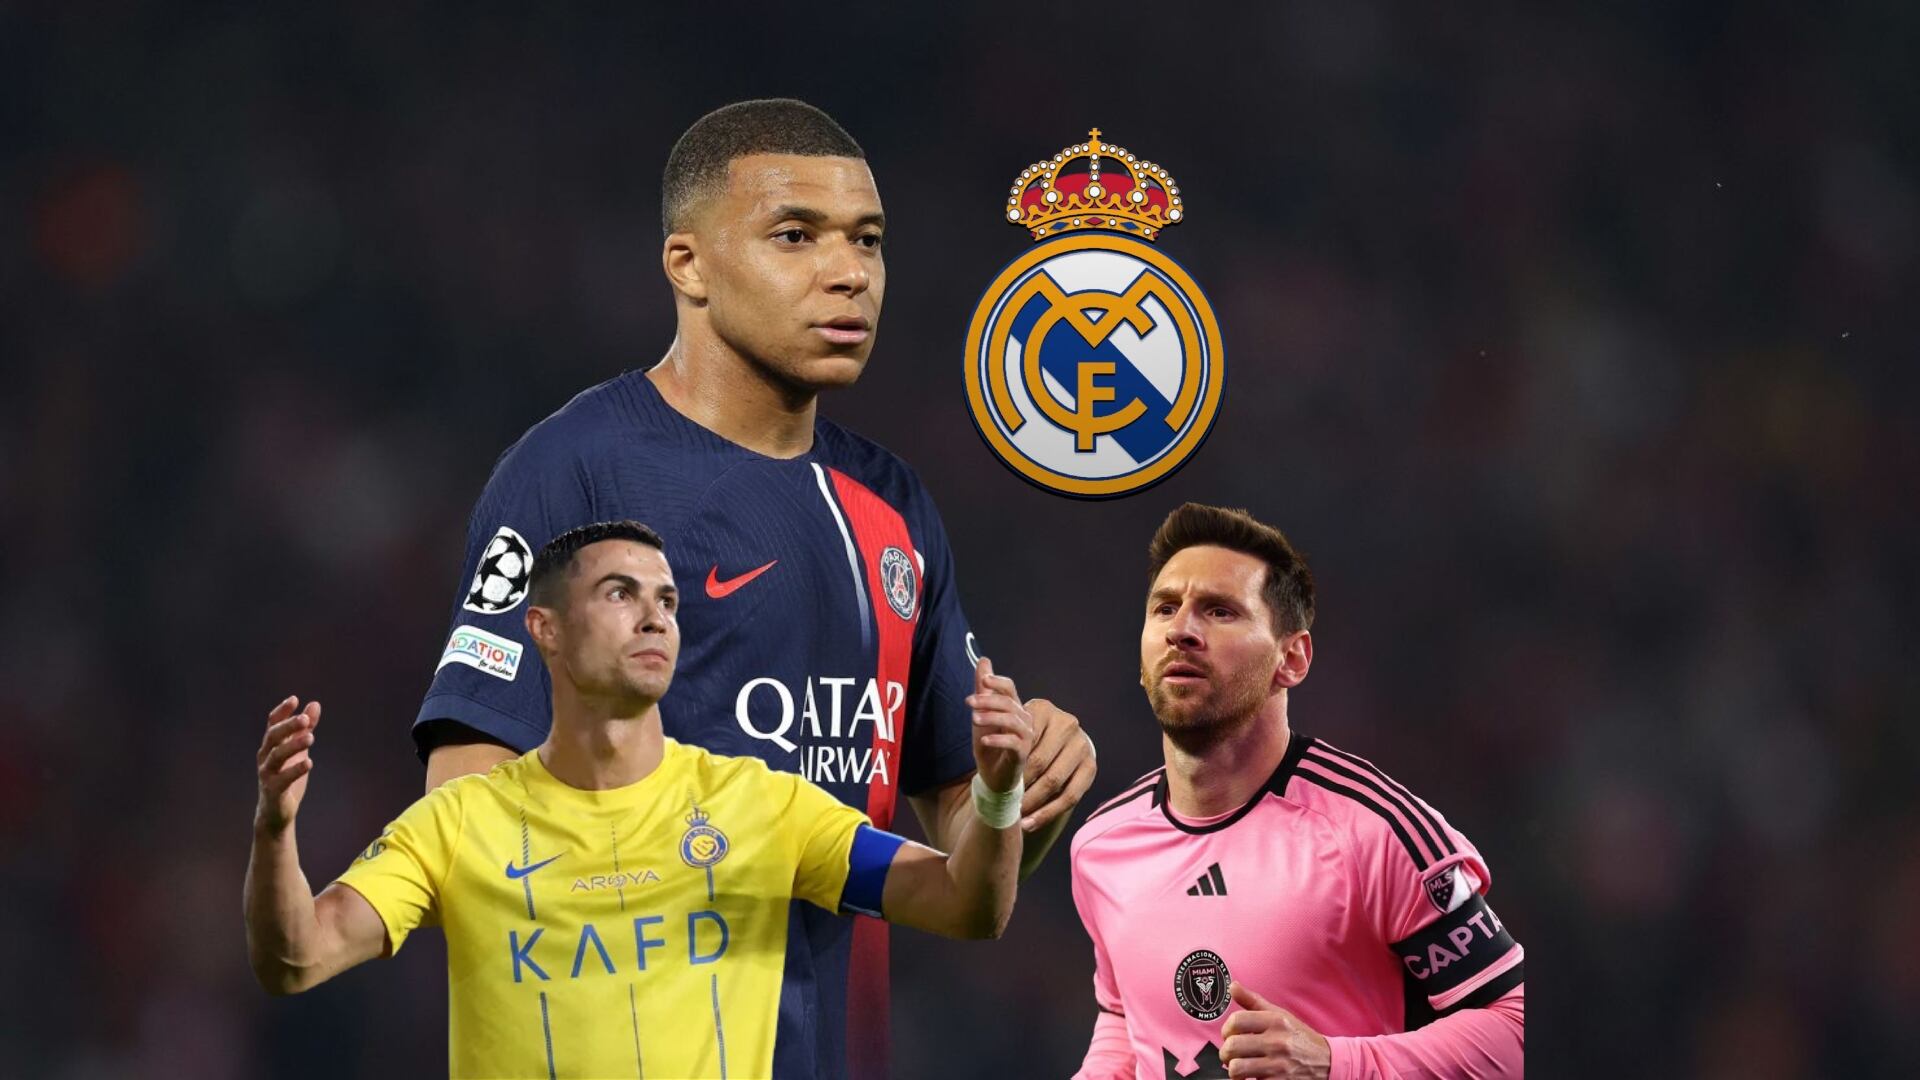 He would have earned more than Cristiano or Messi, the incredible Saudi offer Mbappé rejected to play in Real Madrid